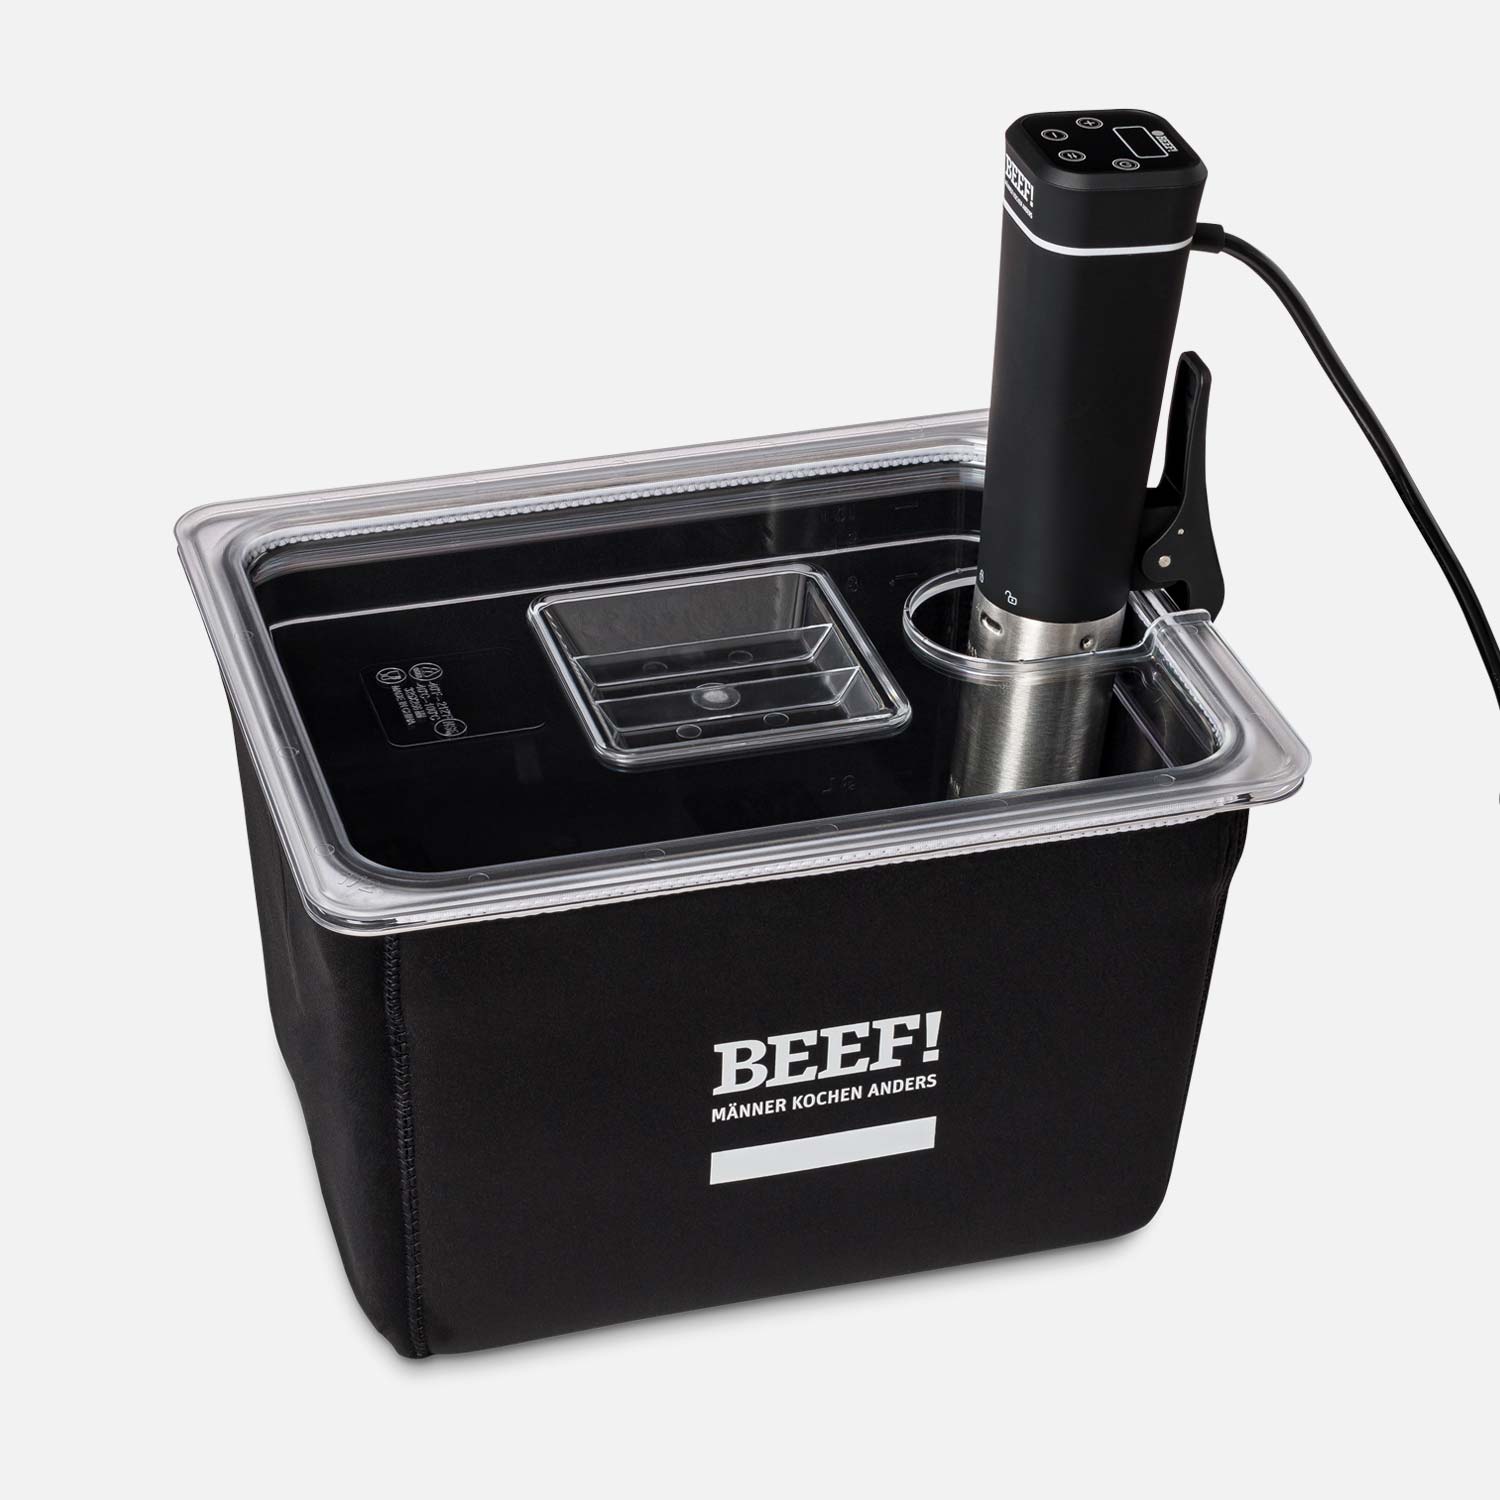 Sous-vide-set BEEF! Edition, consisting of sous-vide stick, 12-liter plastic basin with lid, insulation sleeve, and bag holder